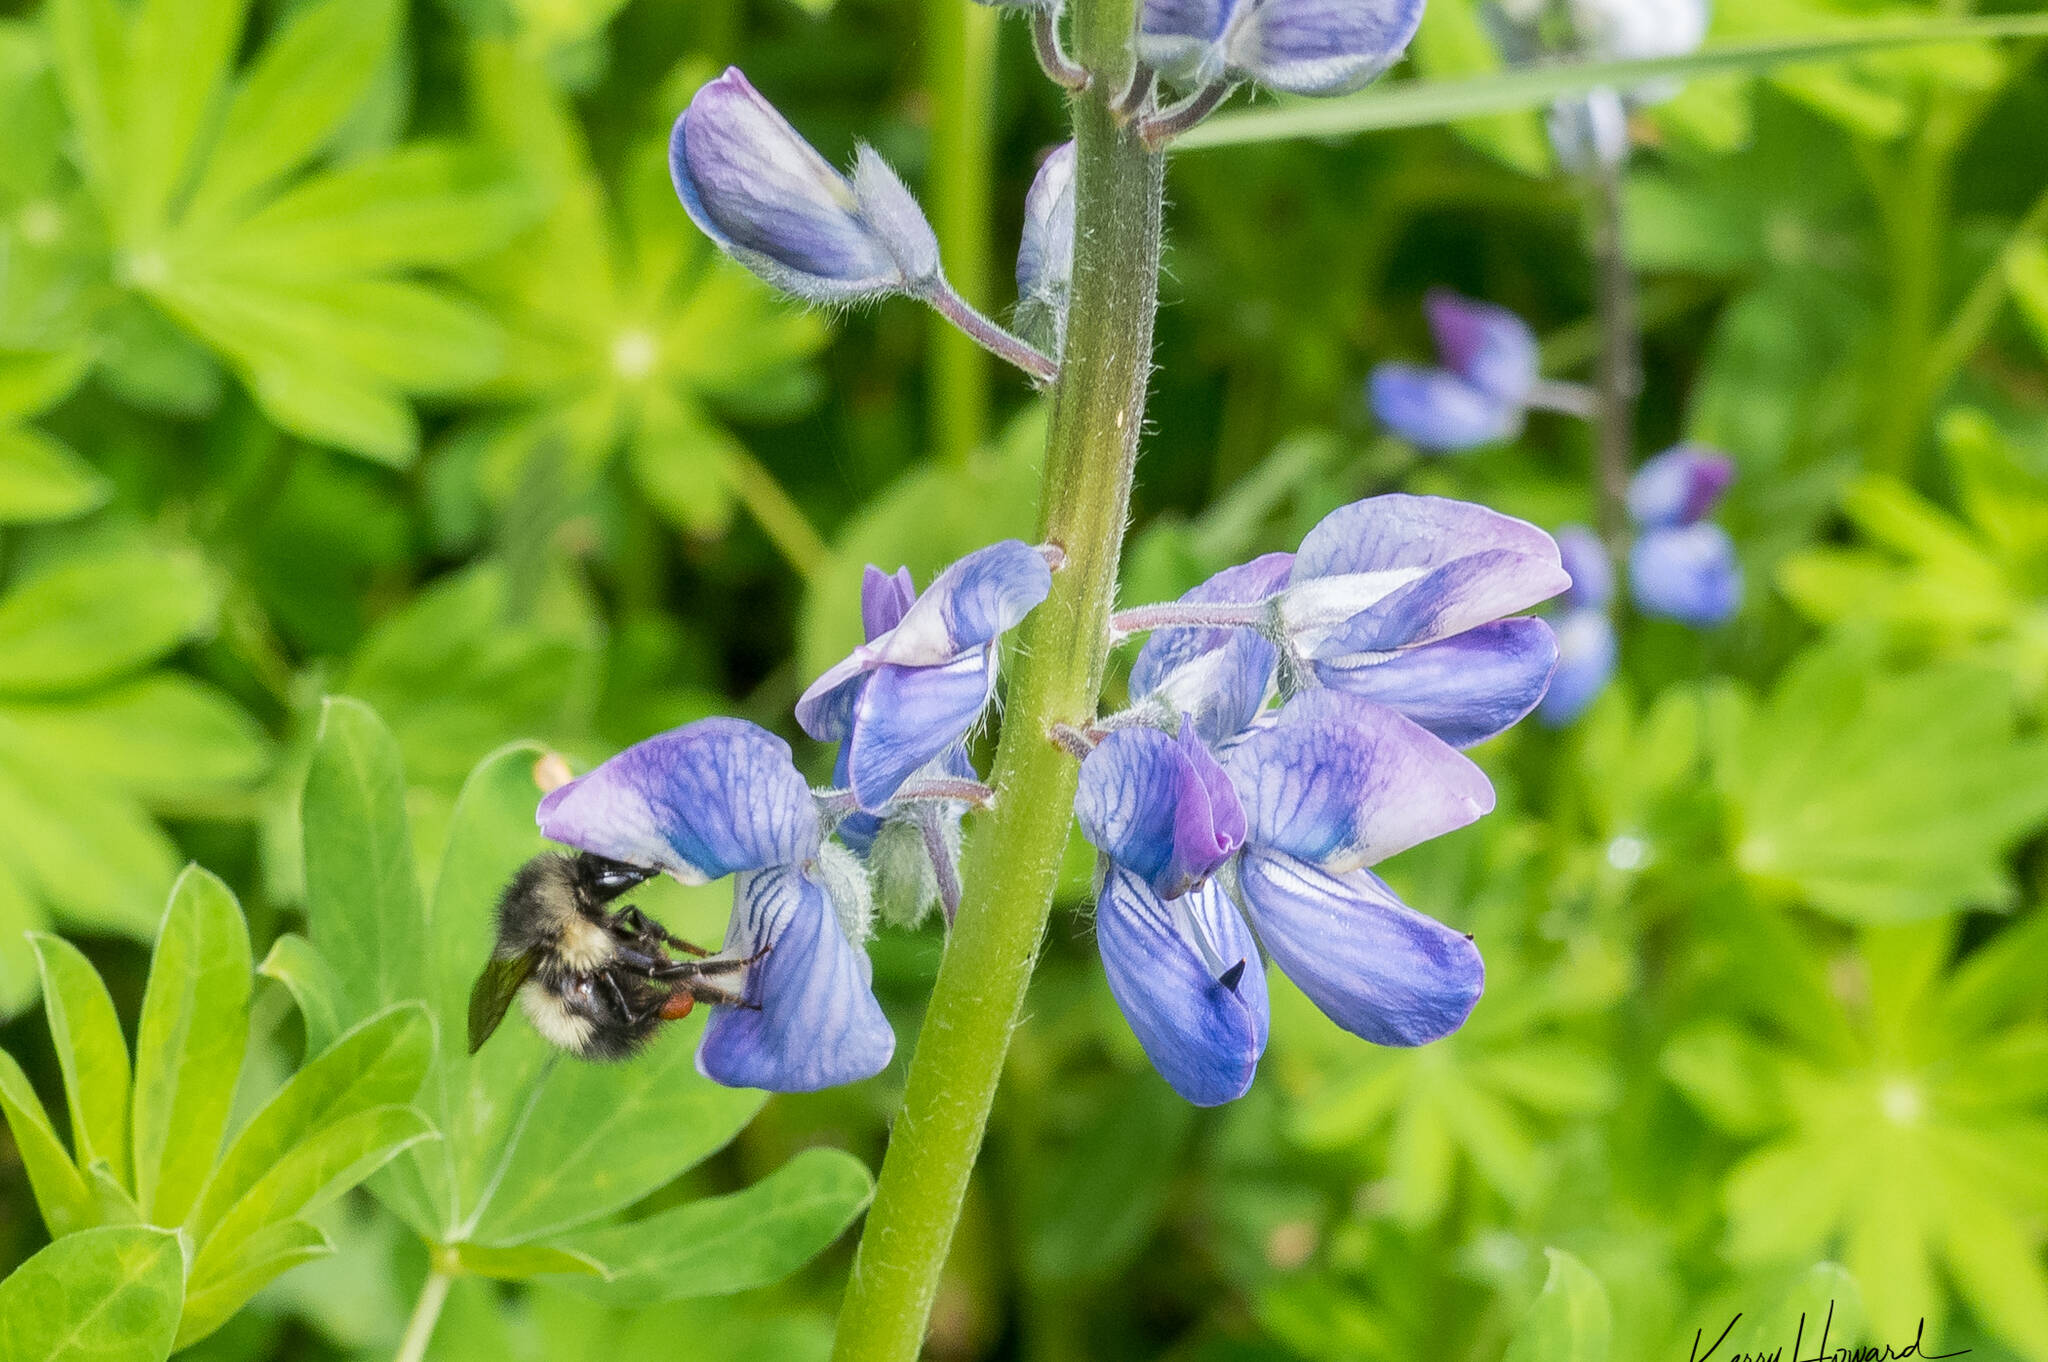 A bumblebee had pried open a lupine flower (Courtesy Photo / Kerry Howard)